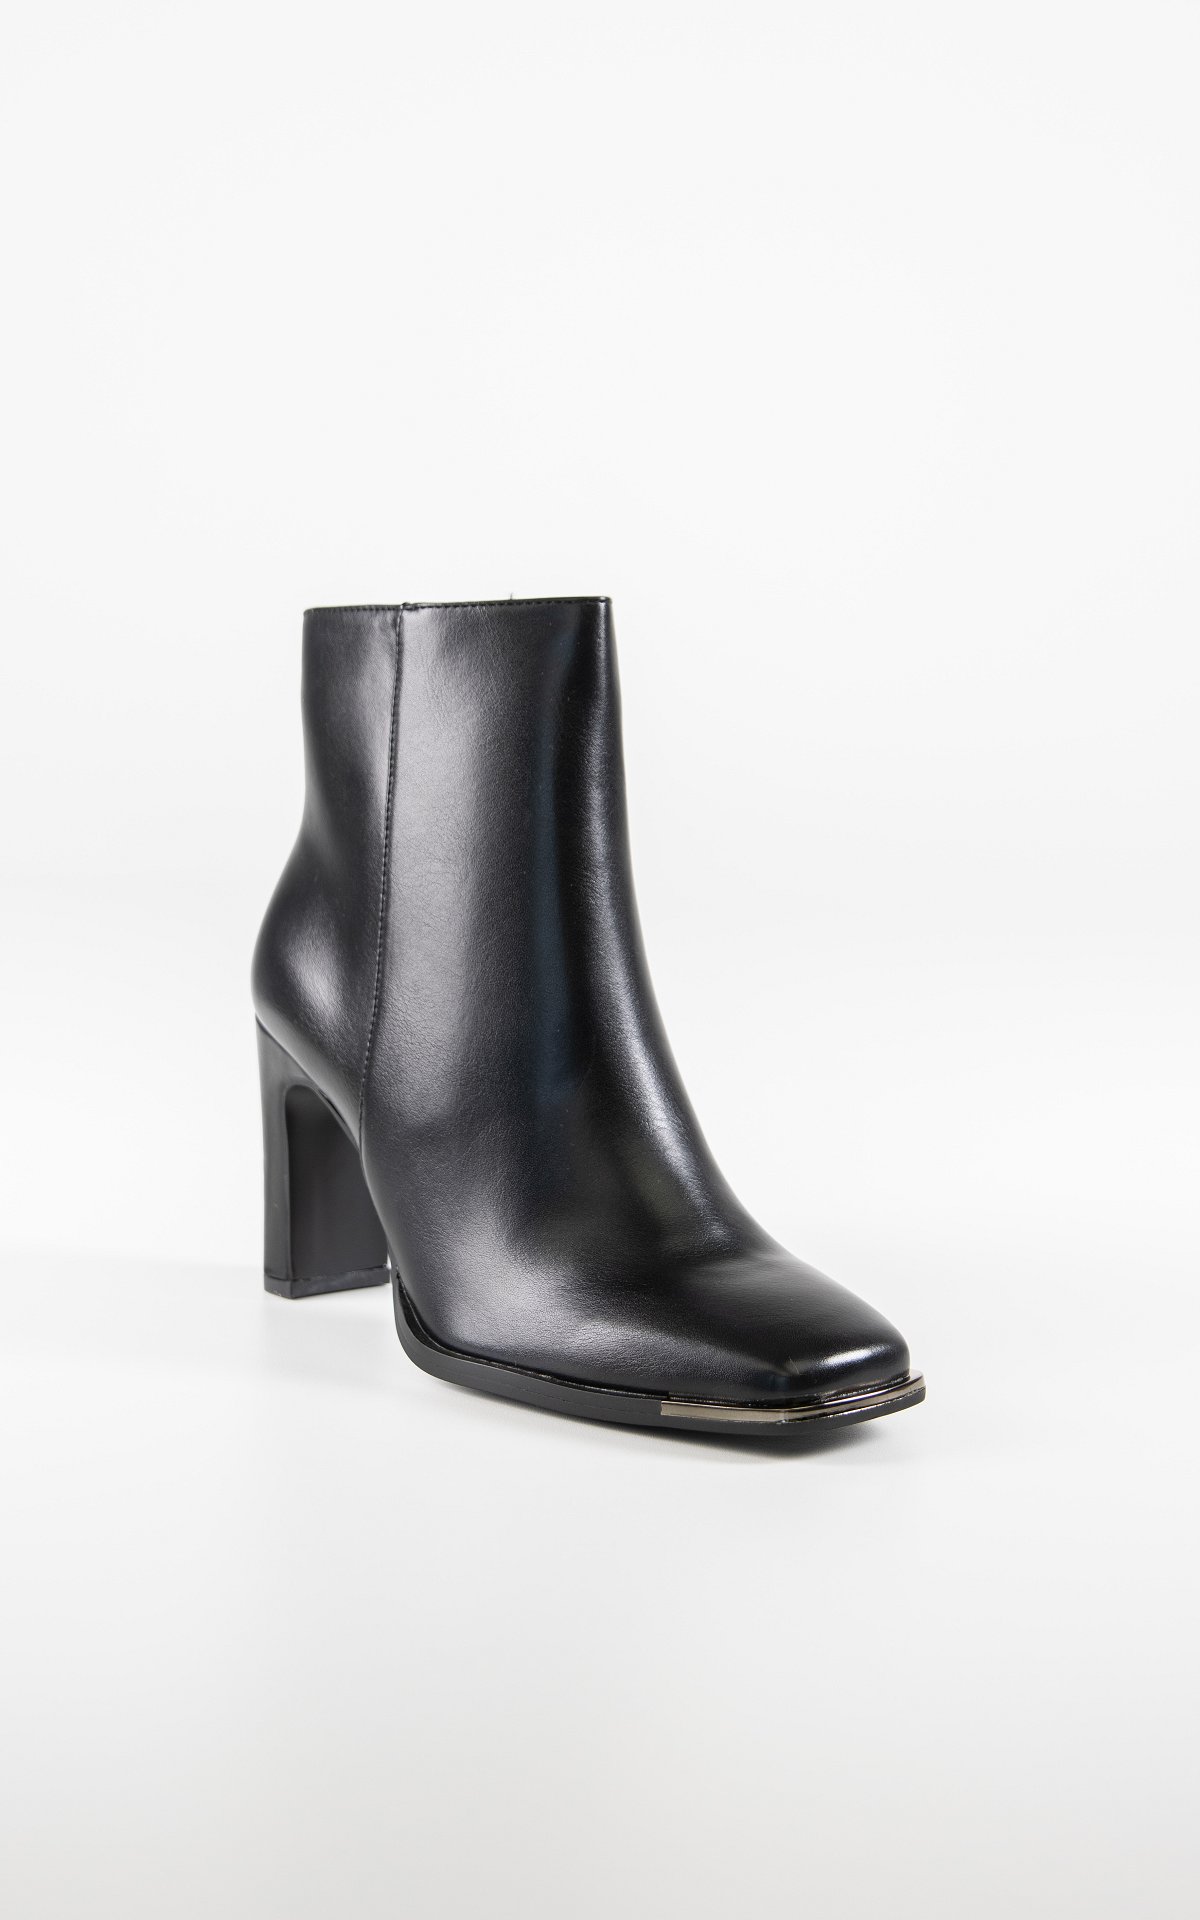 Leather look boots with squared nose | Guts & Gusto